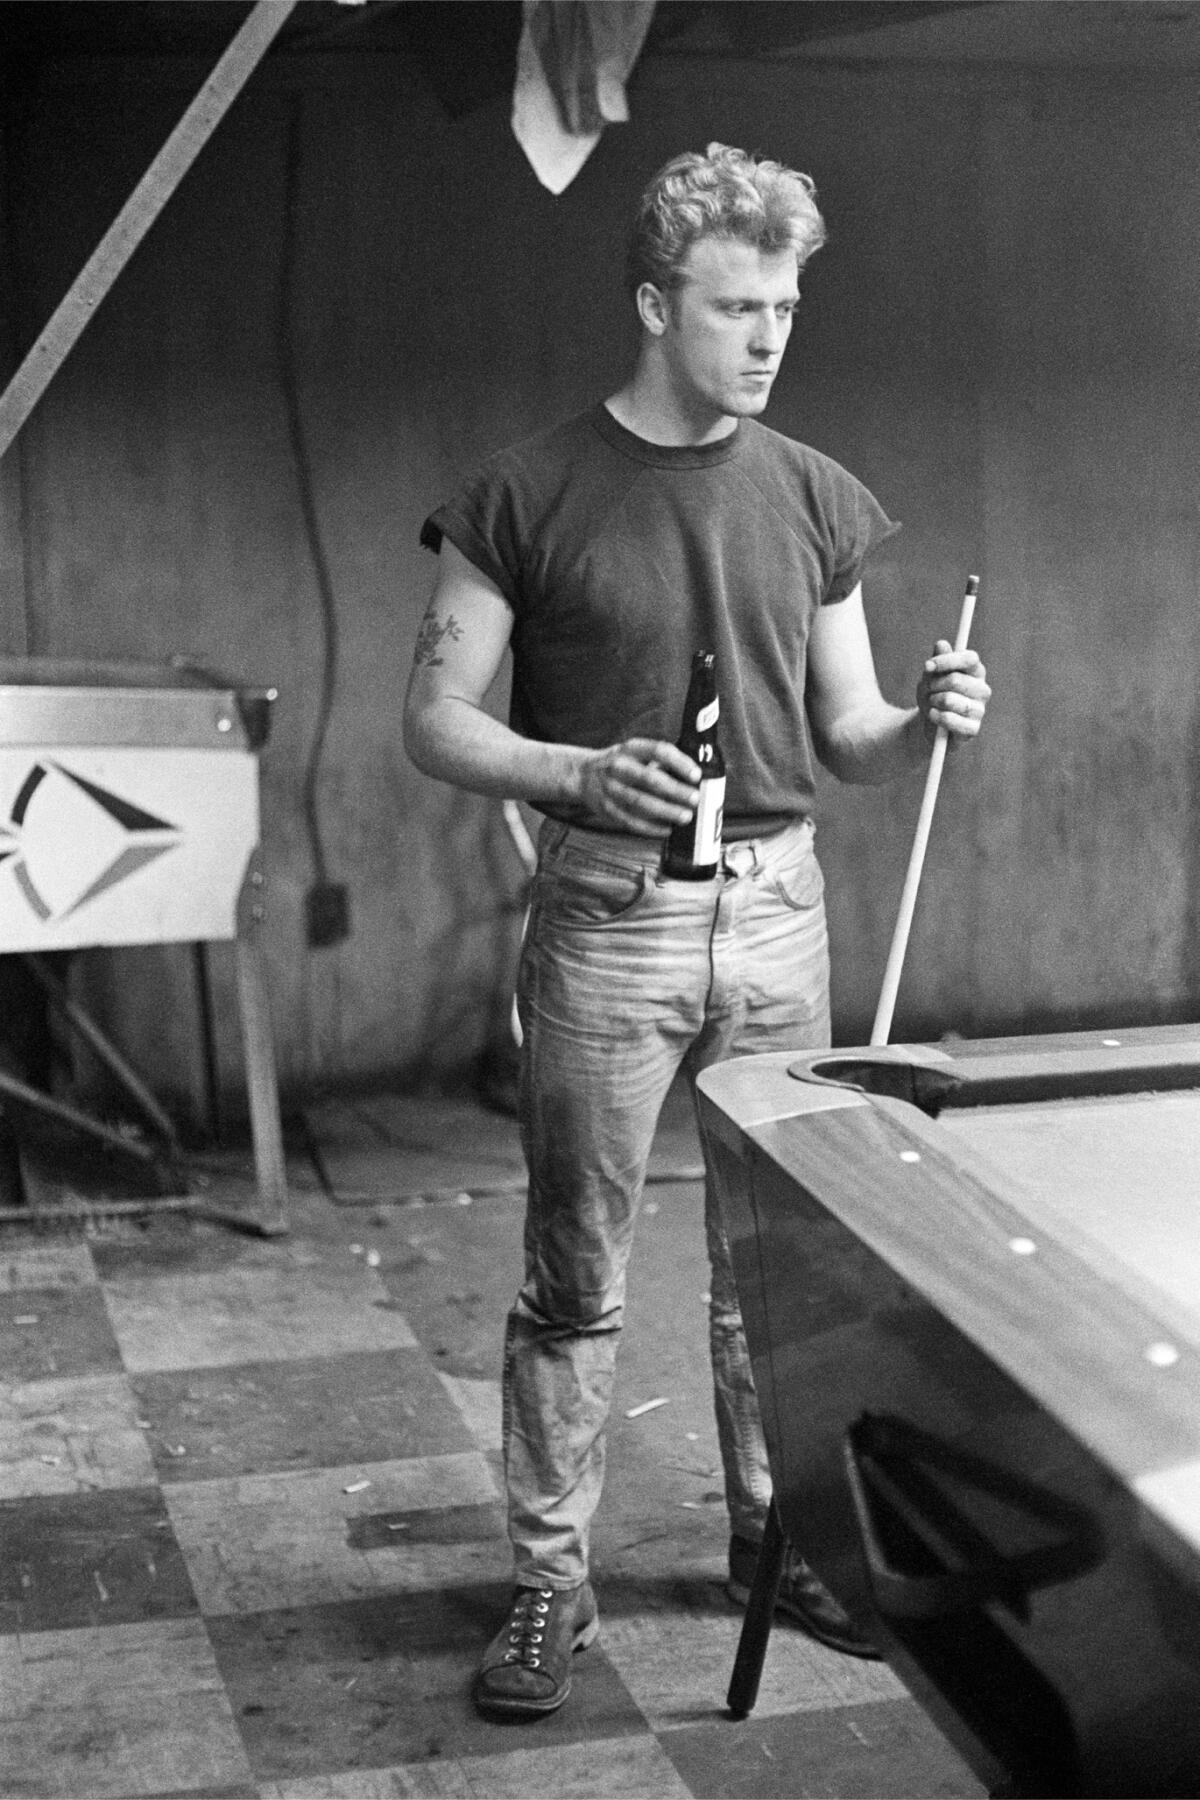 A man with a beer shoots pool.